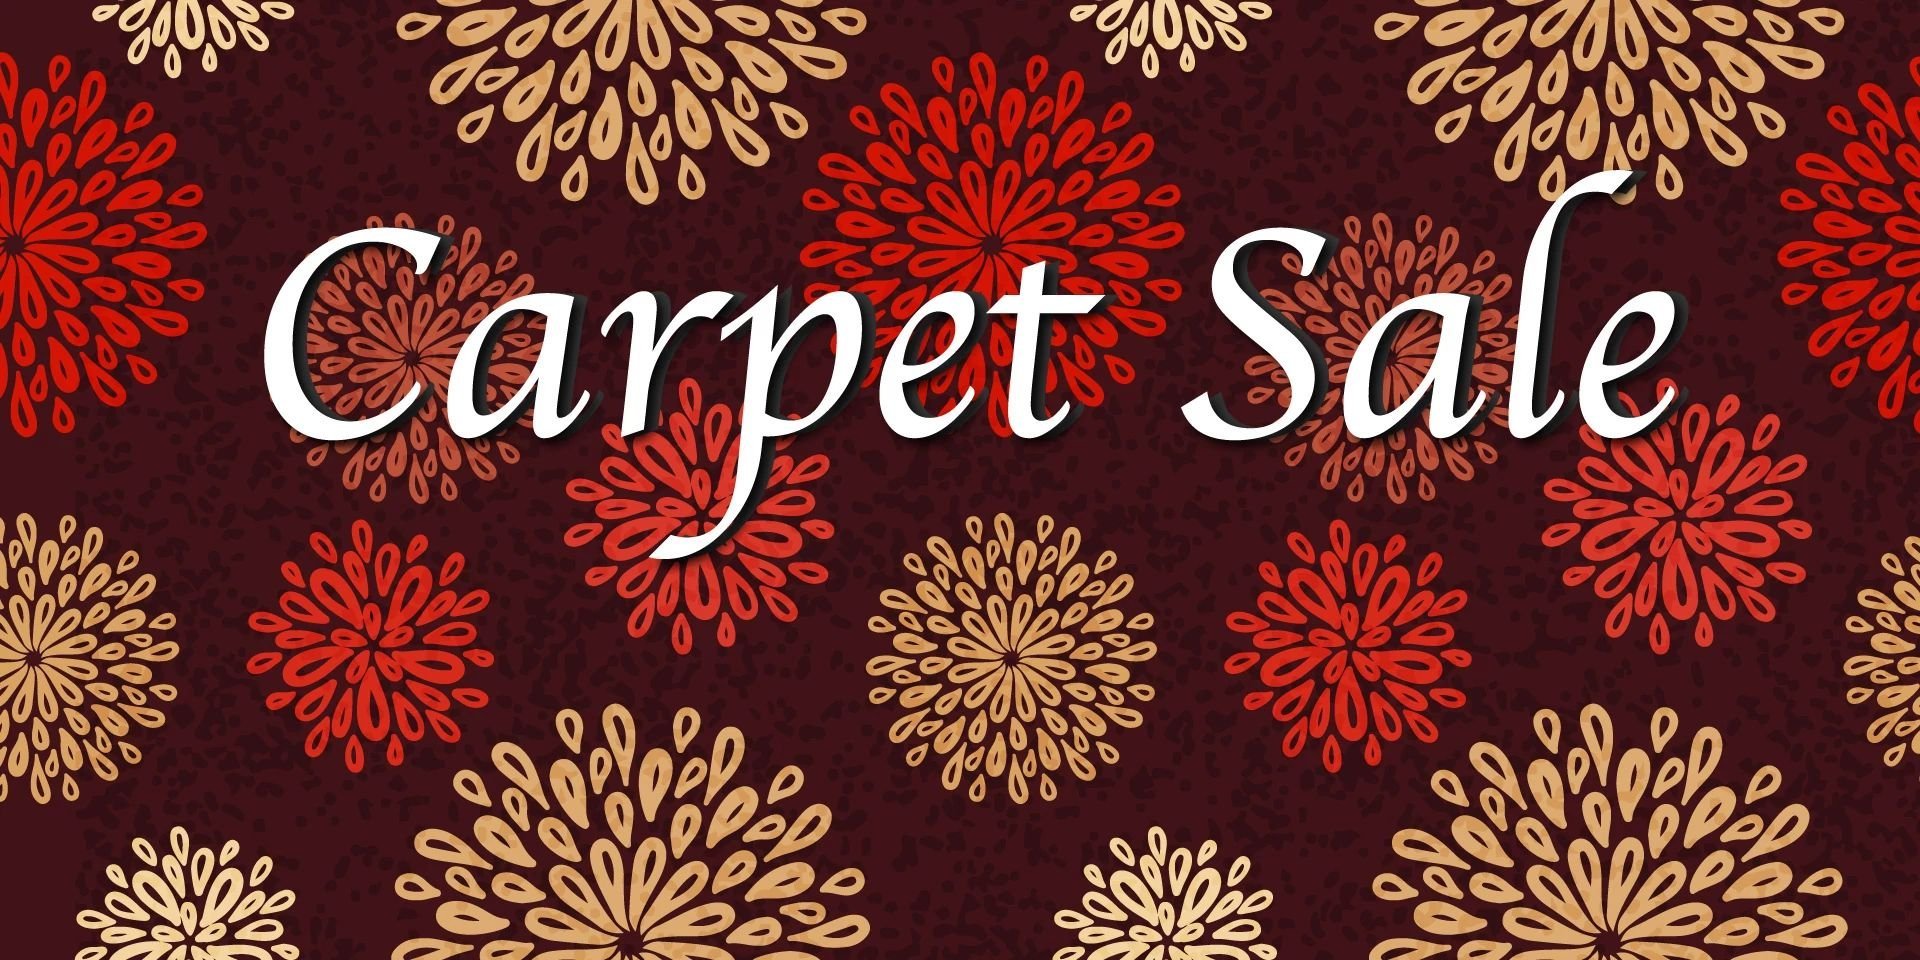 carpet sale banner by Pat Smith’s Flooring in Louisville, KY